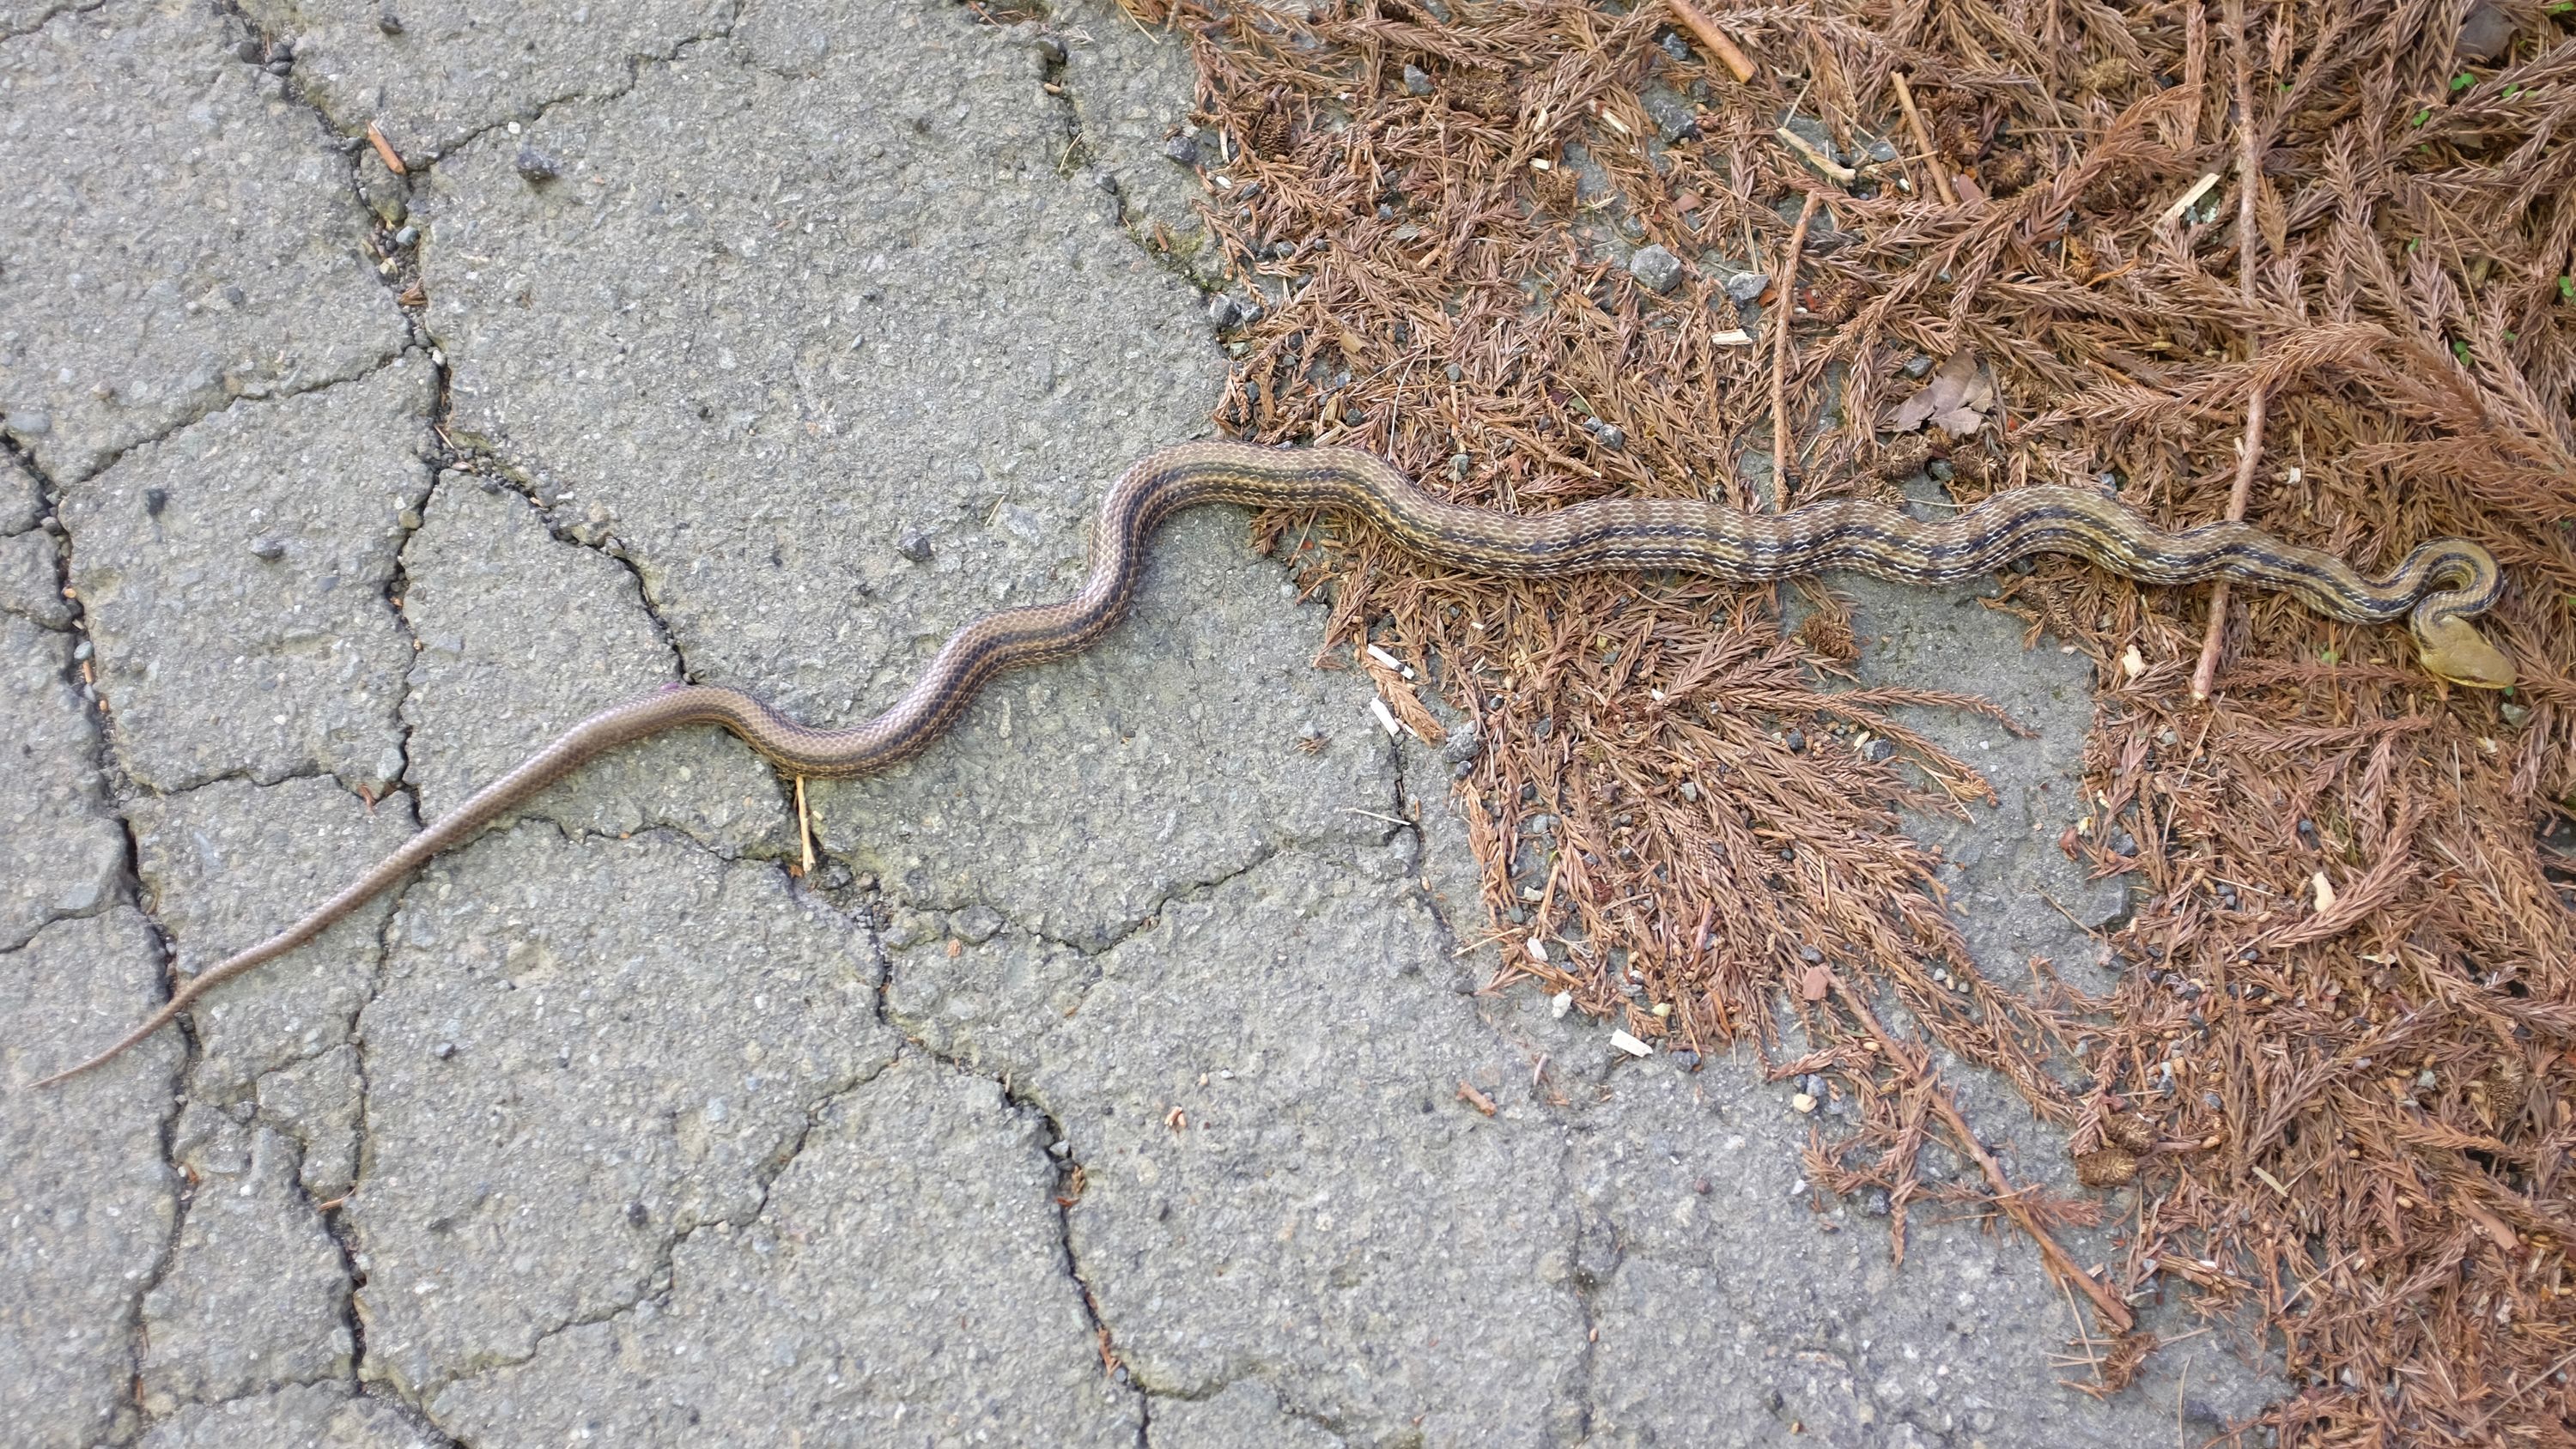 A Japanese striped snake lies alert on the road.